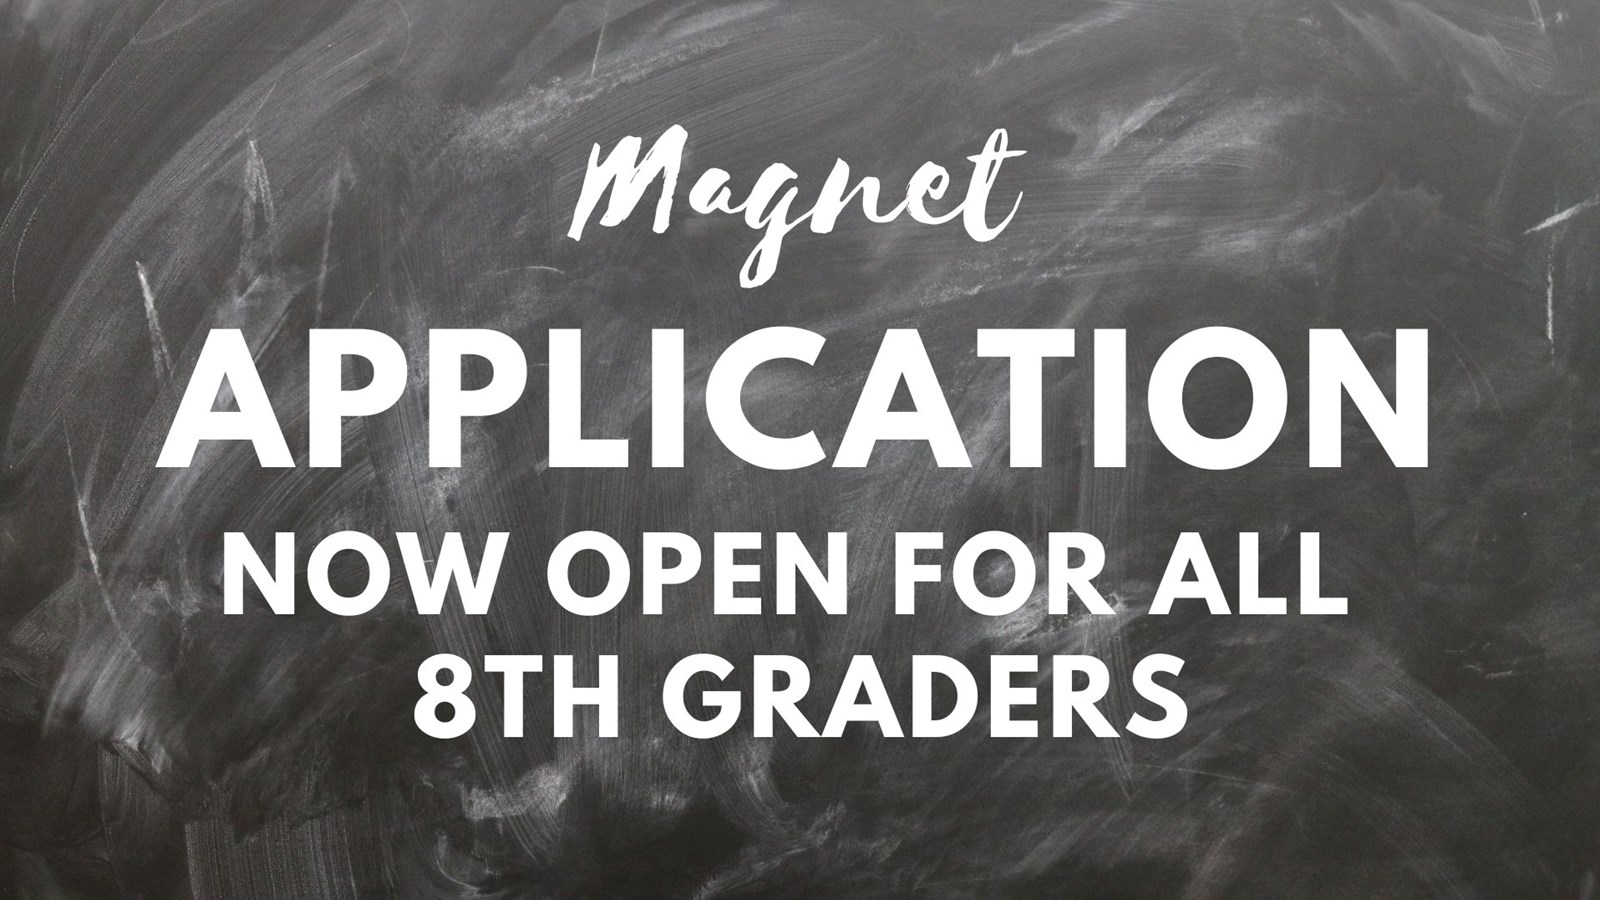 Chalkboard Magnet Application Now open for all 8th graders